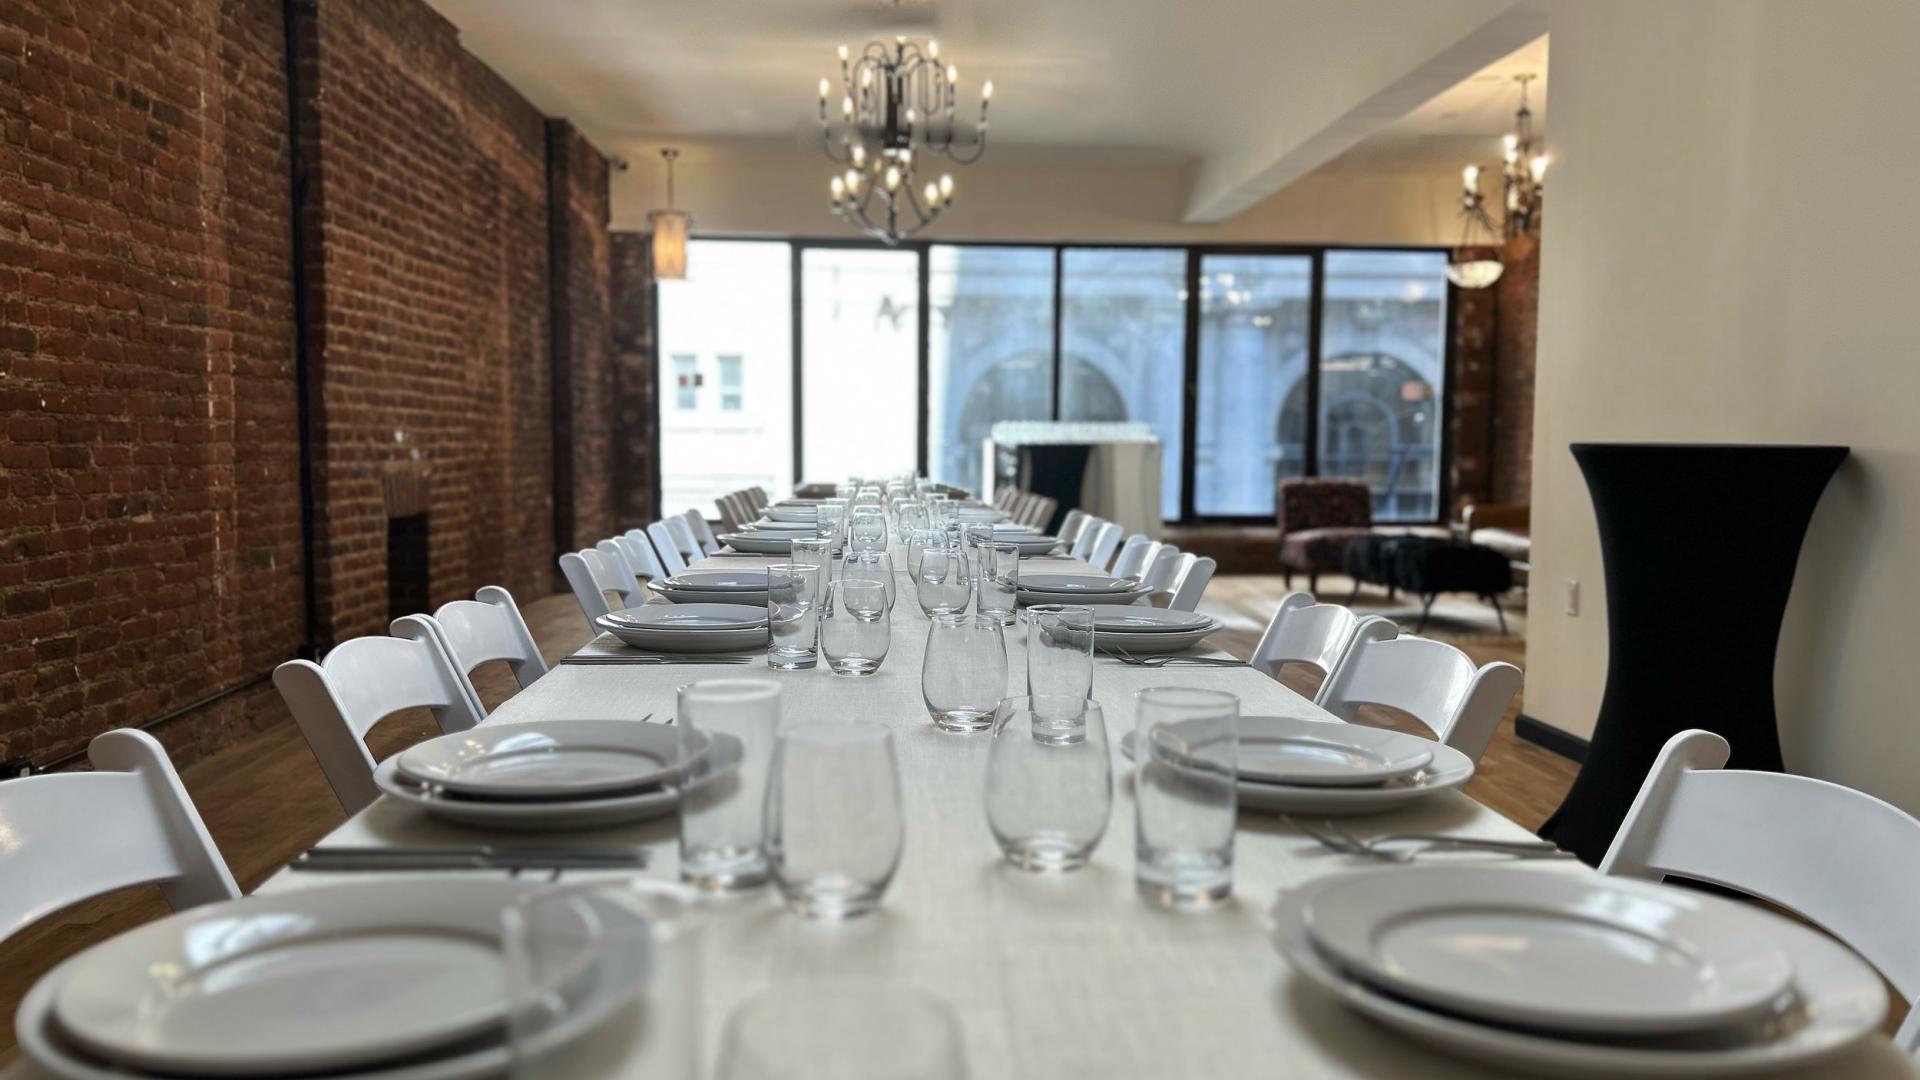 Cooking Class Venues for Rent in New York City, NY